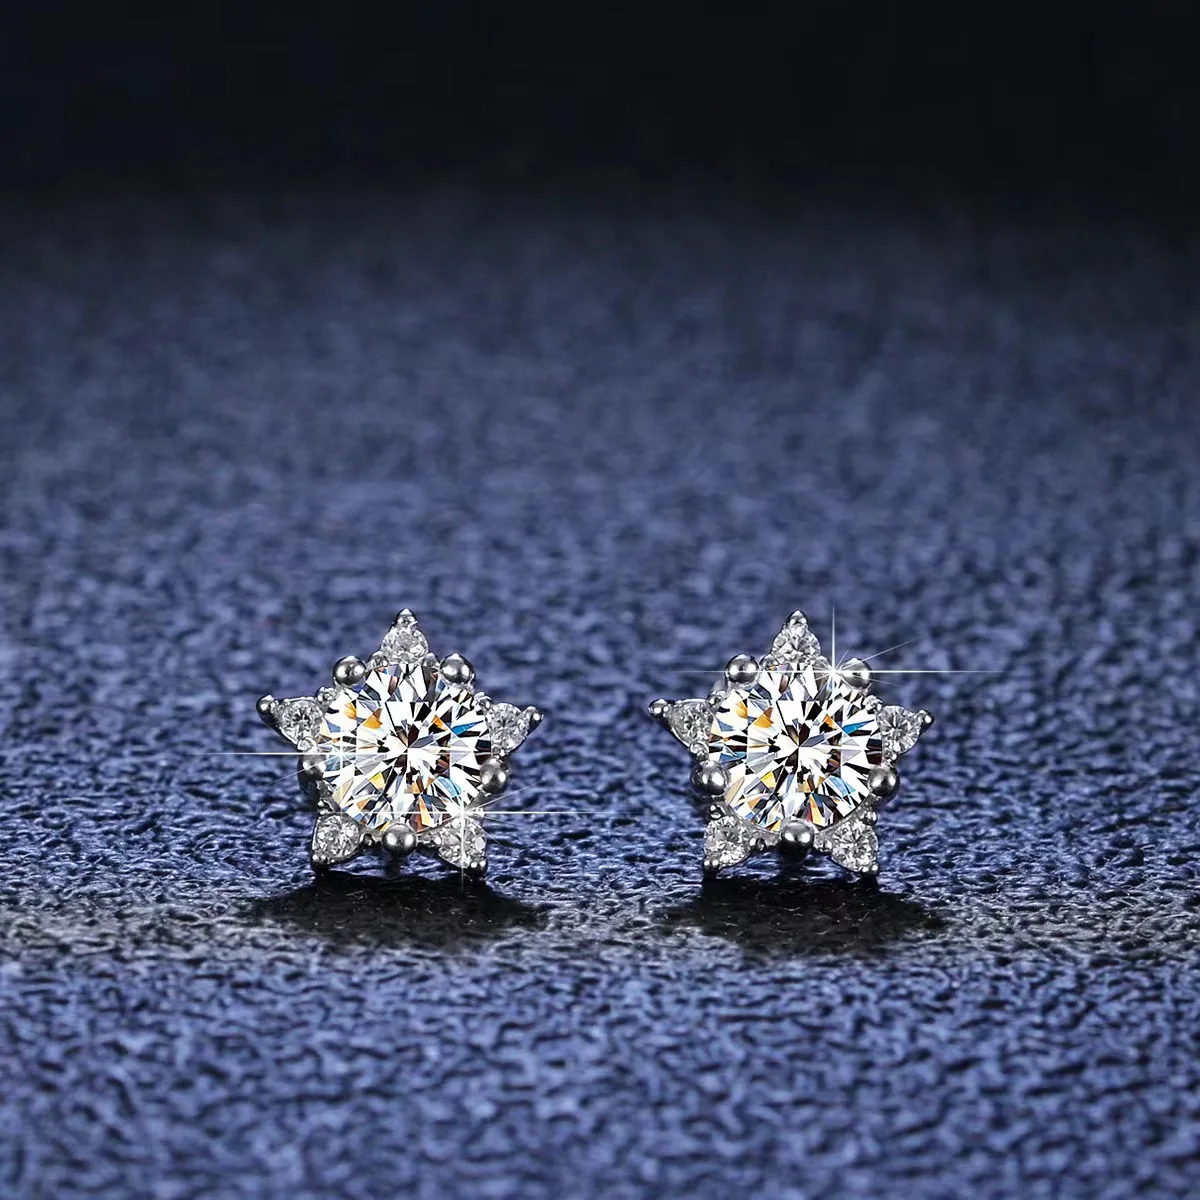 

MILAMISS Real Moissanite Diamond Star Stud Earrings 0.5ct D Color VVS1 Pure 925 Sterling Silver for Women Wedding Fine Jewelry